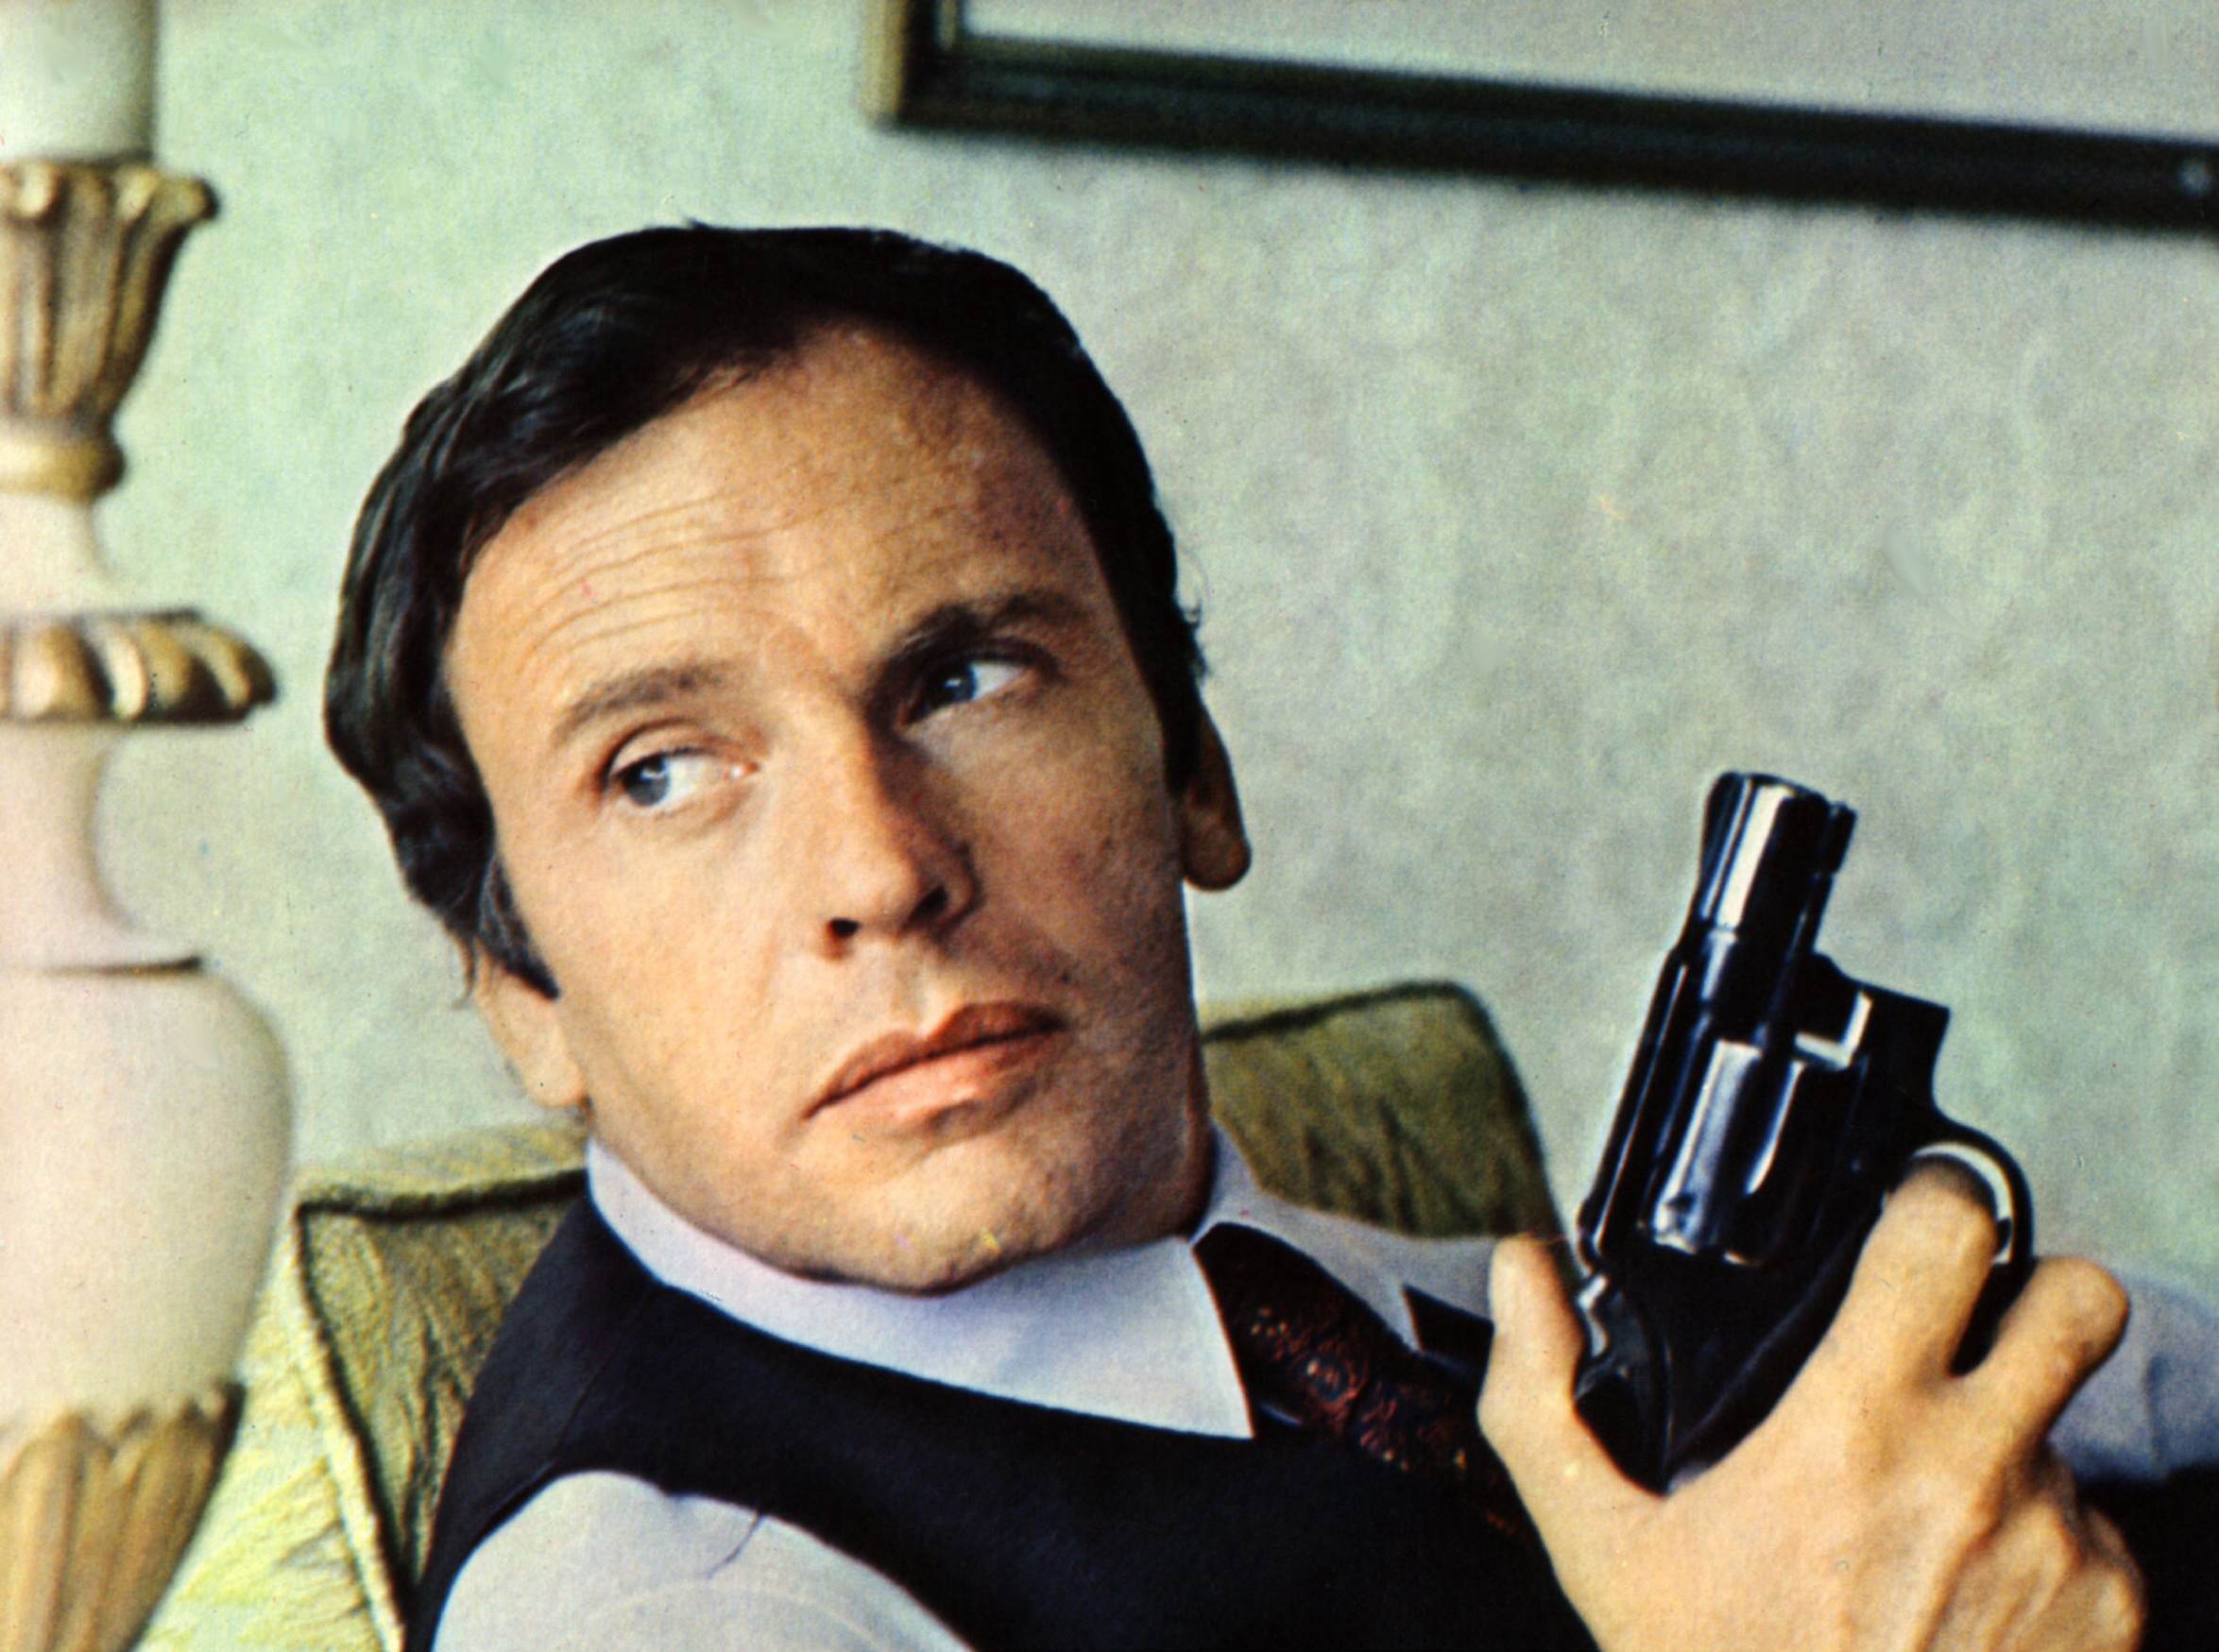 Jean-Louis Trintignant (FilmPublicityArchive/United Archives via Getty Images)